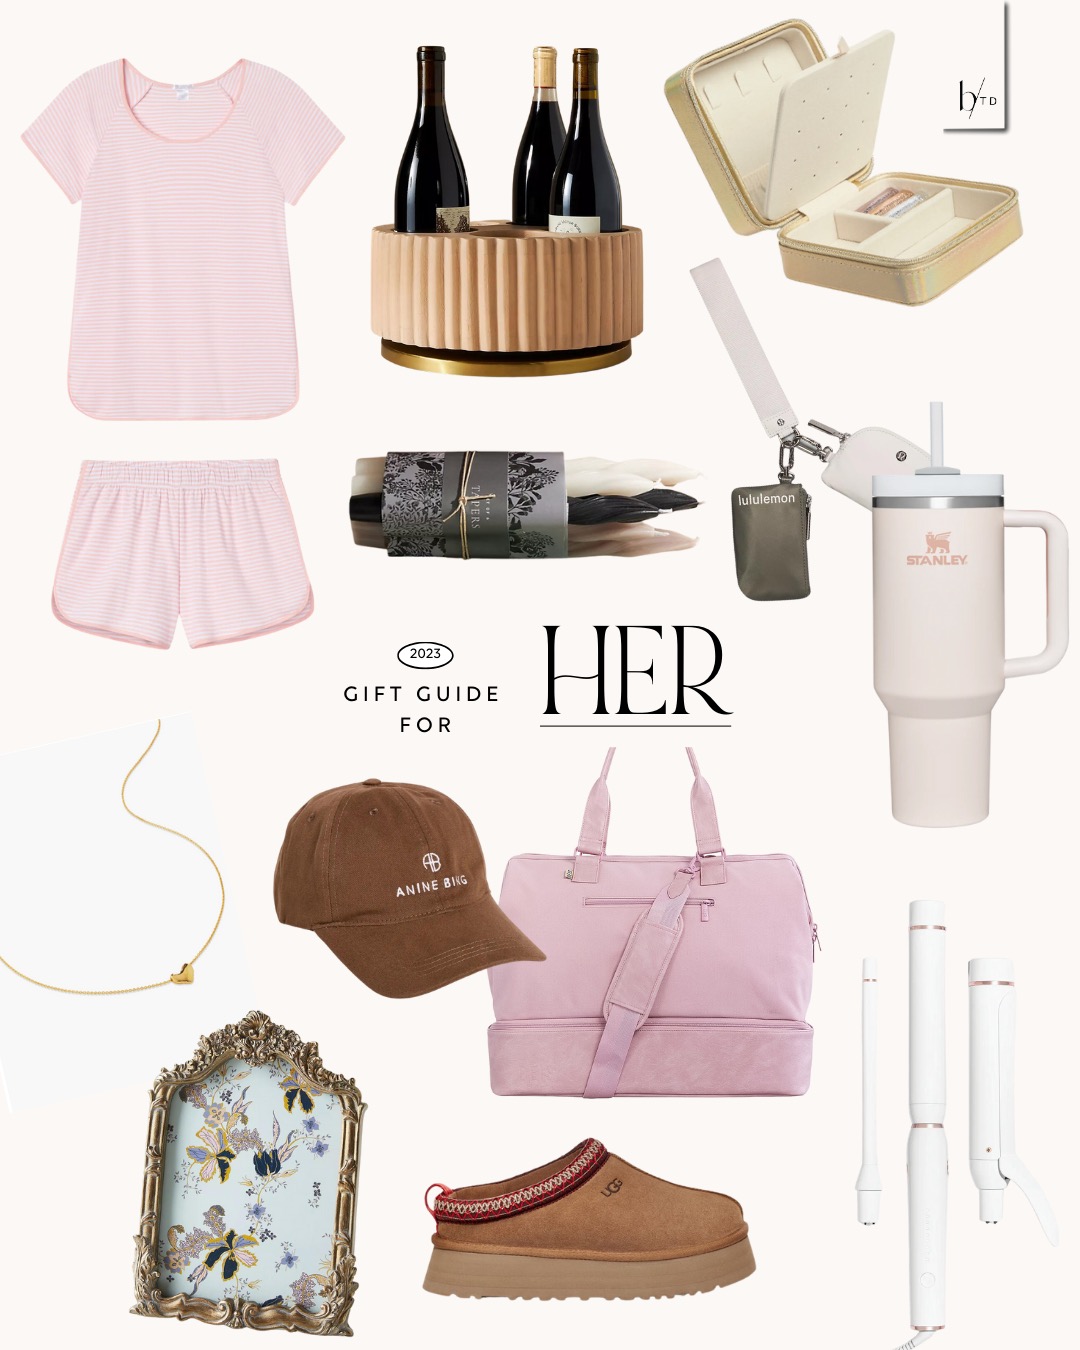 2023 Gift Guide For Her